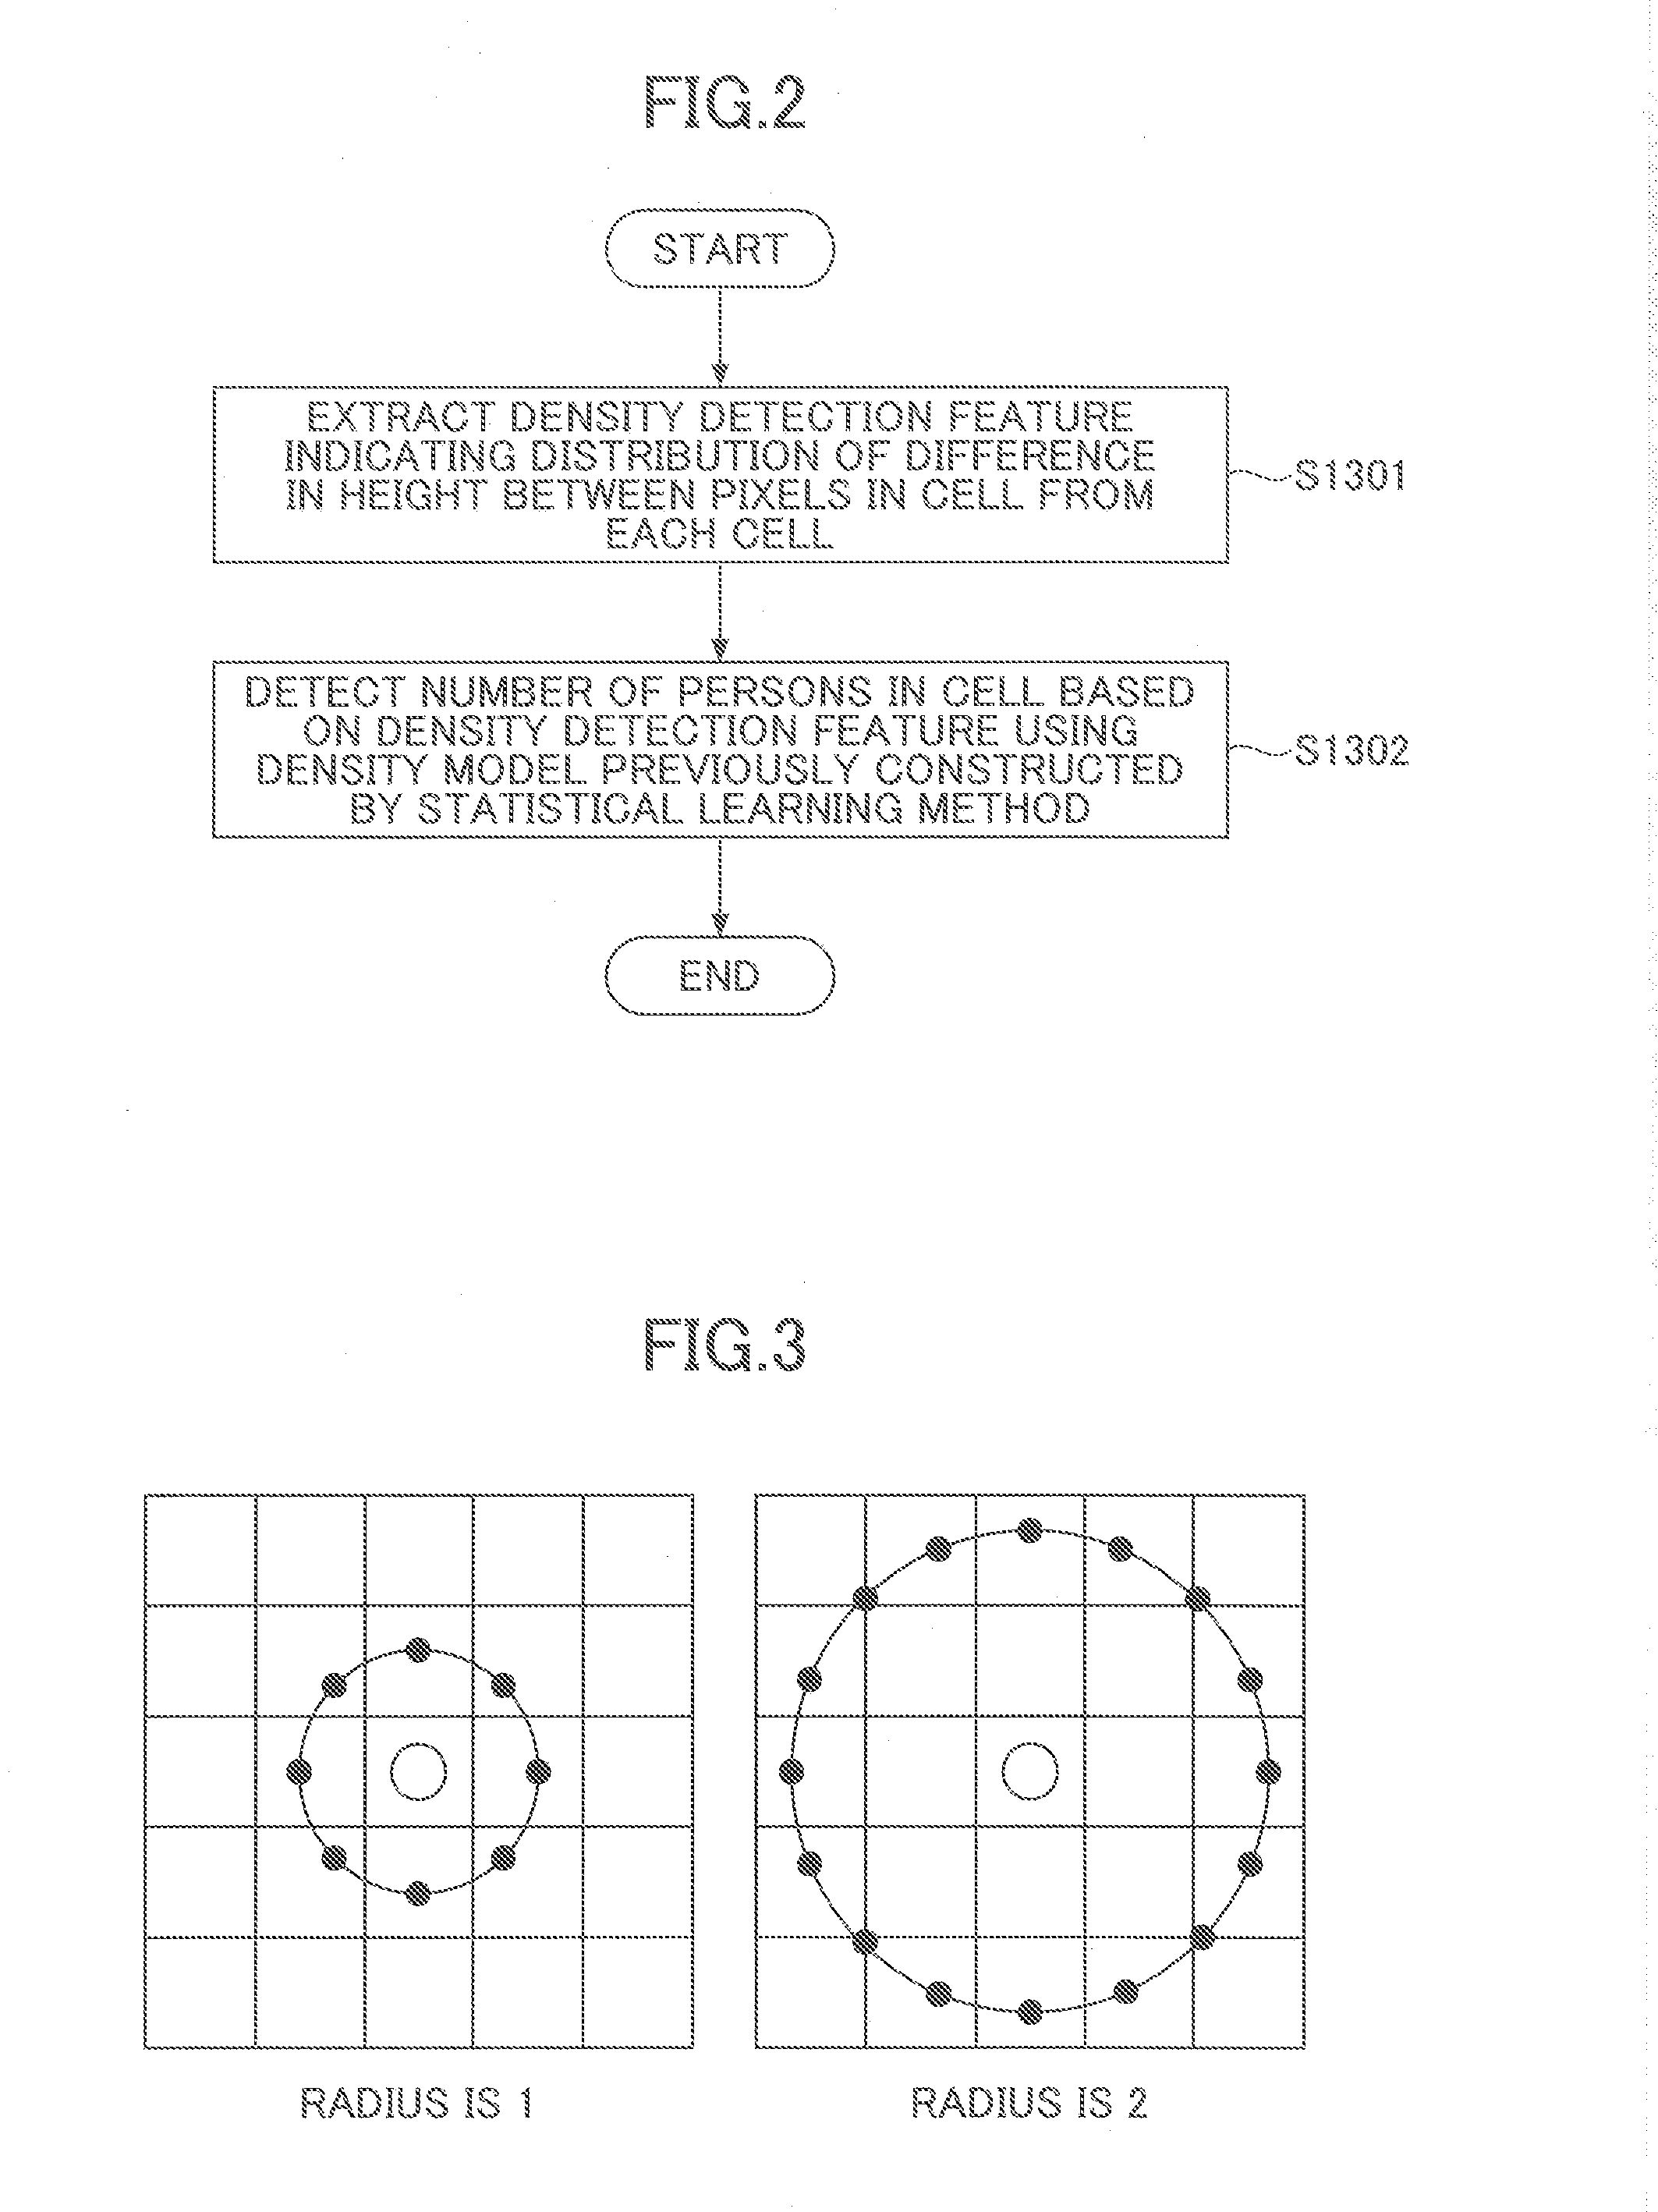 Method for detecting crowd density, and method and apparatus for detecting interest degree of crowd in target position